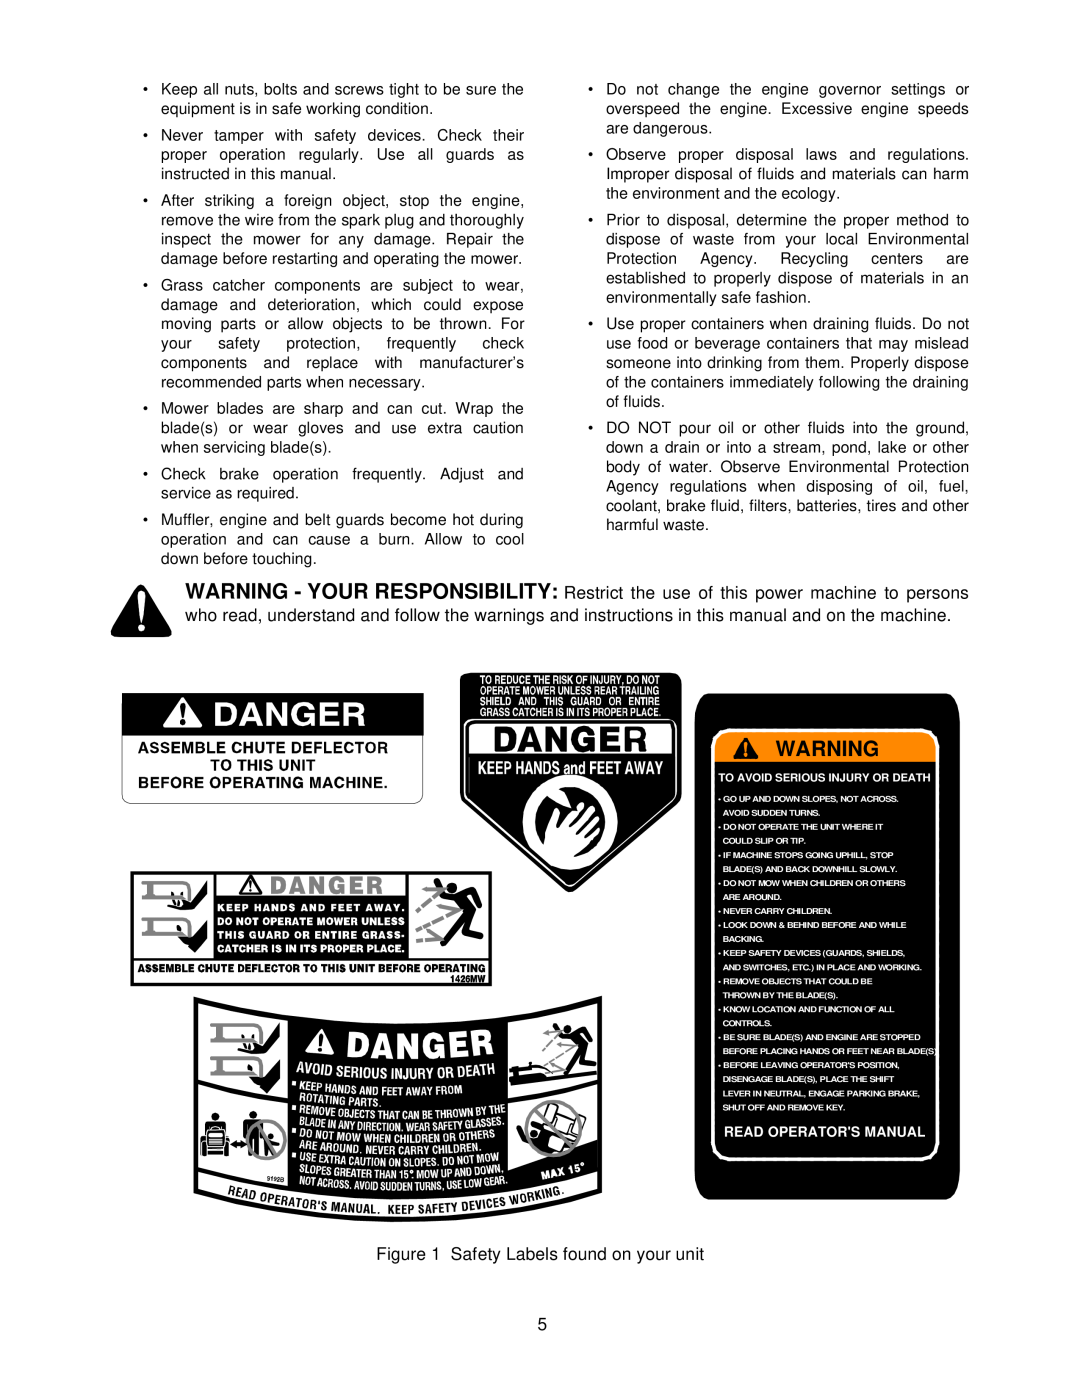 Troy-Bilt 604 manual Safety Labels found on your unit, Read Operators Manual 